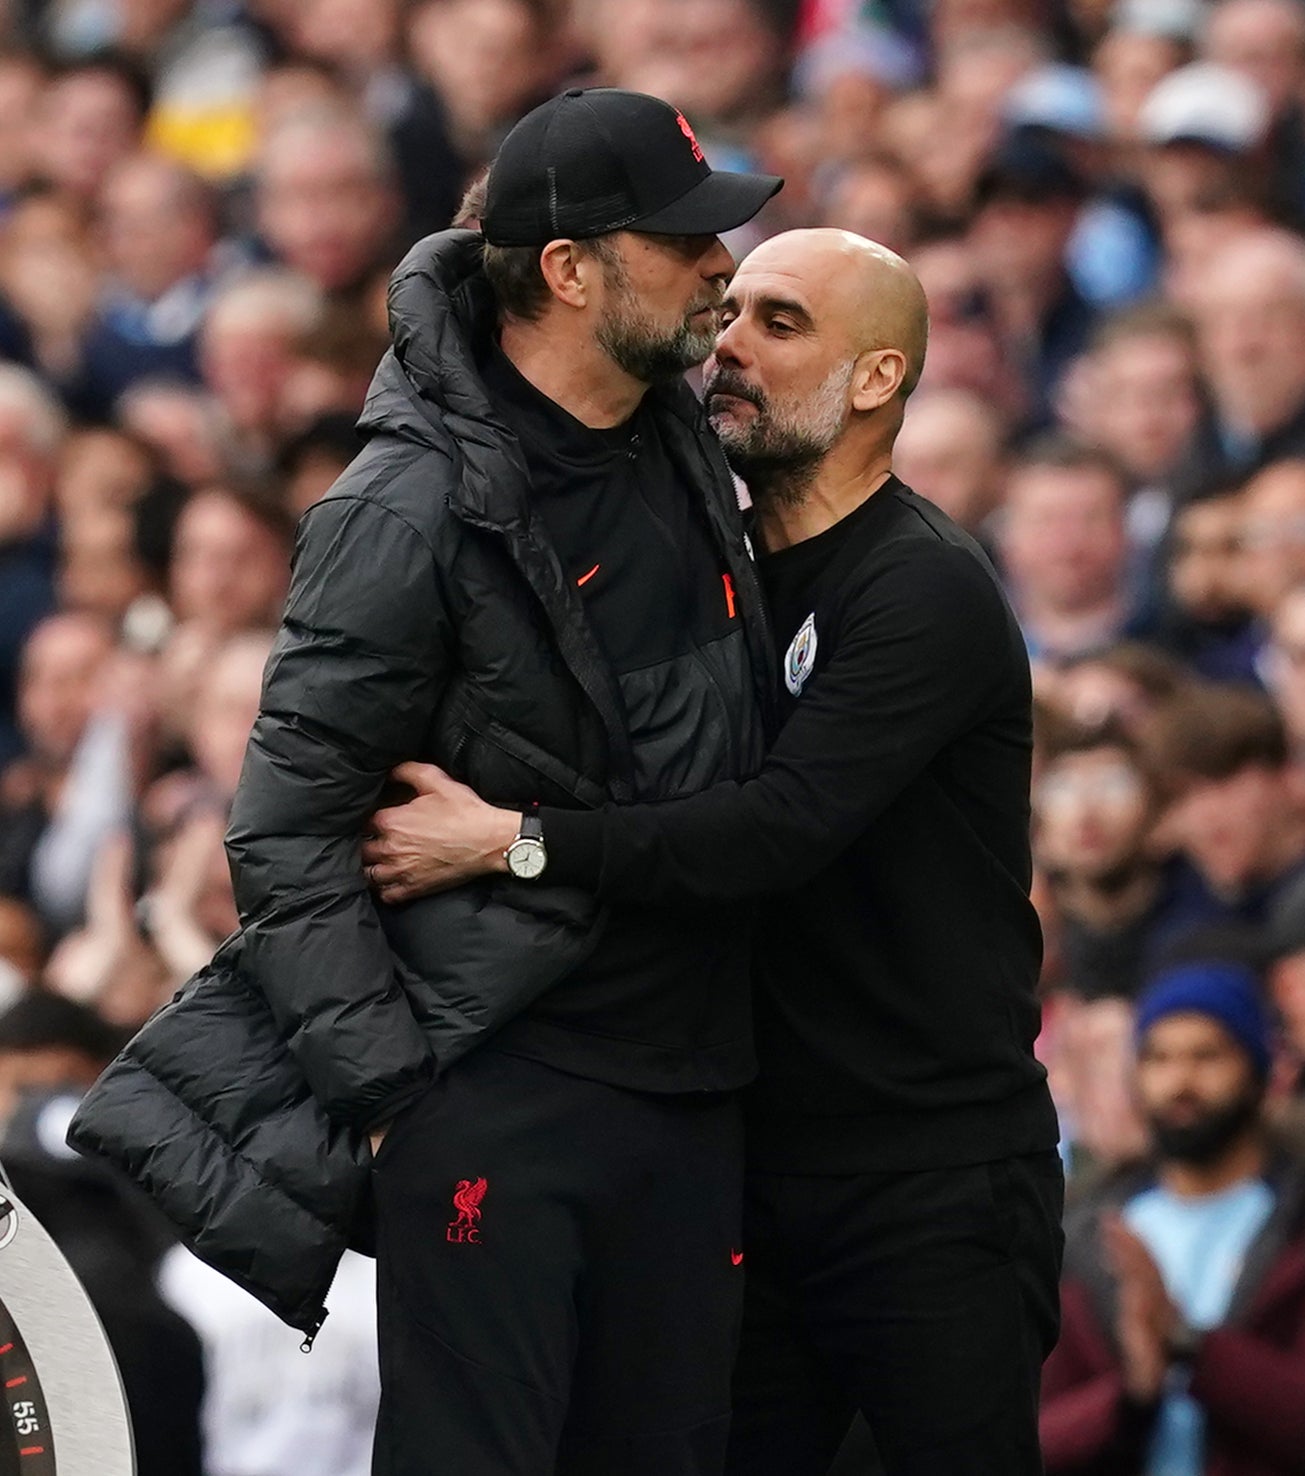 Pep Guardiola (right) and Jurgen Klopp are hoping for multiple honours this season (Martin Rickett/PA)